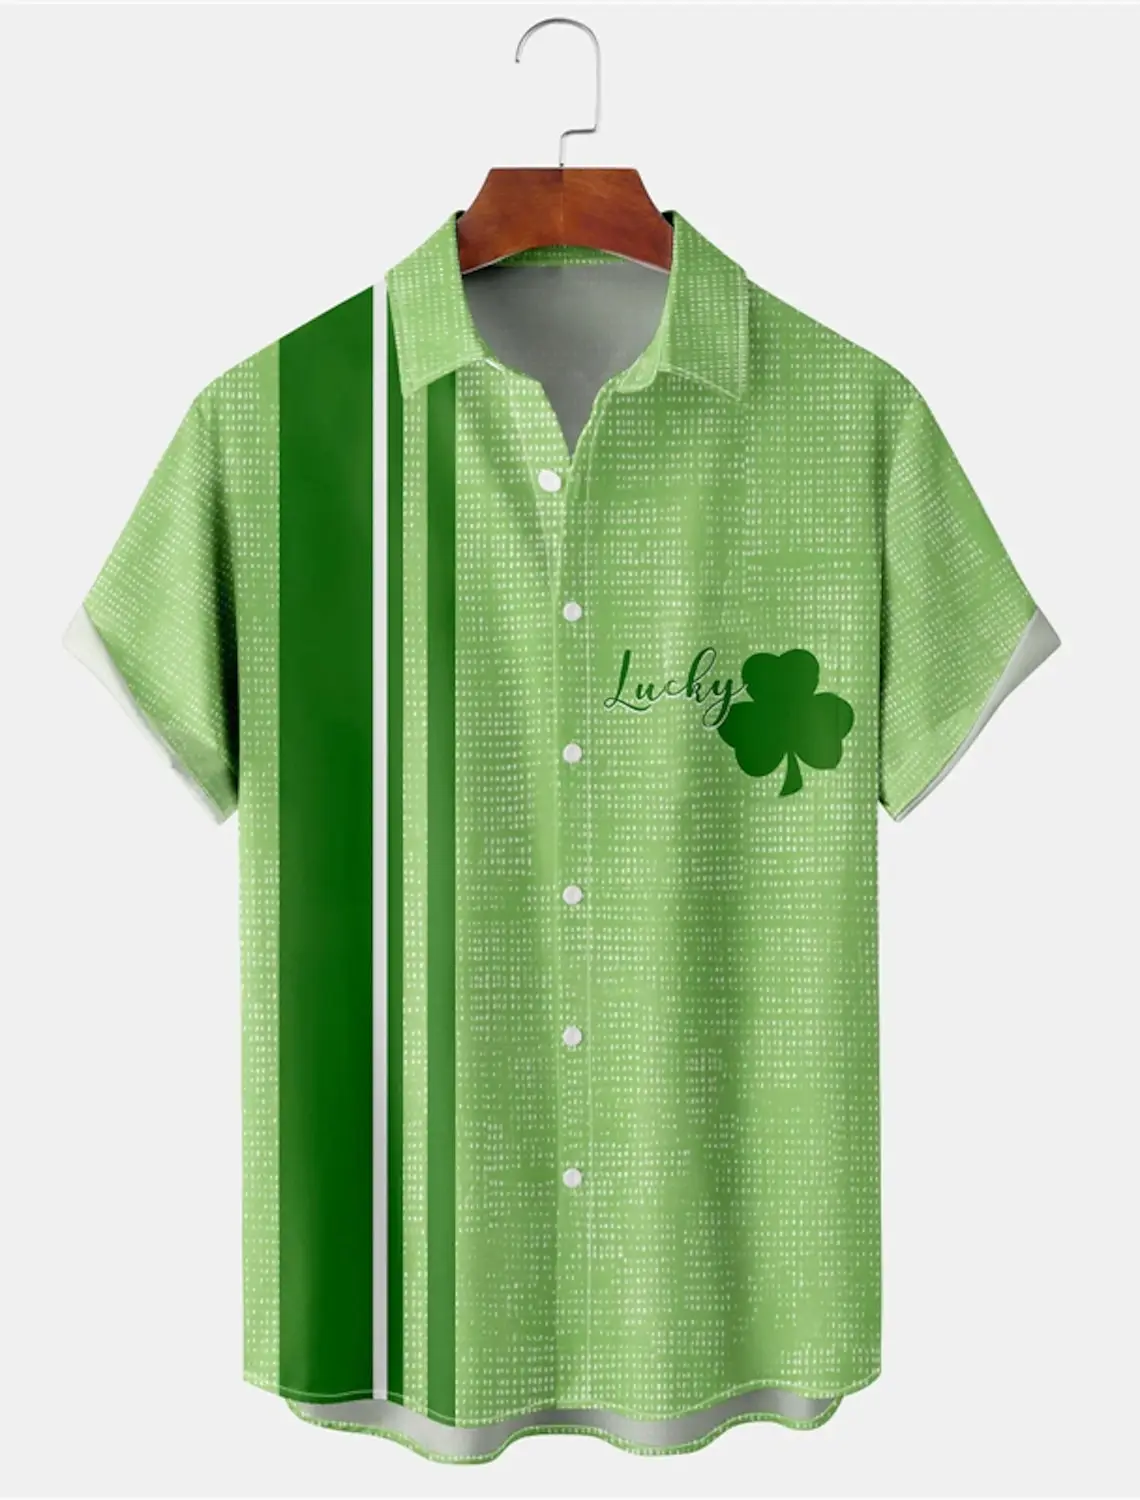 

Fashion Summer Men‘s Shirt St.Patrick's Day Graphic 3D Print Green Clover Short Sleeve Shirt Casual Festival Party Hawaii Tee